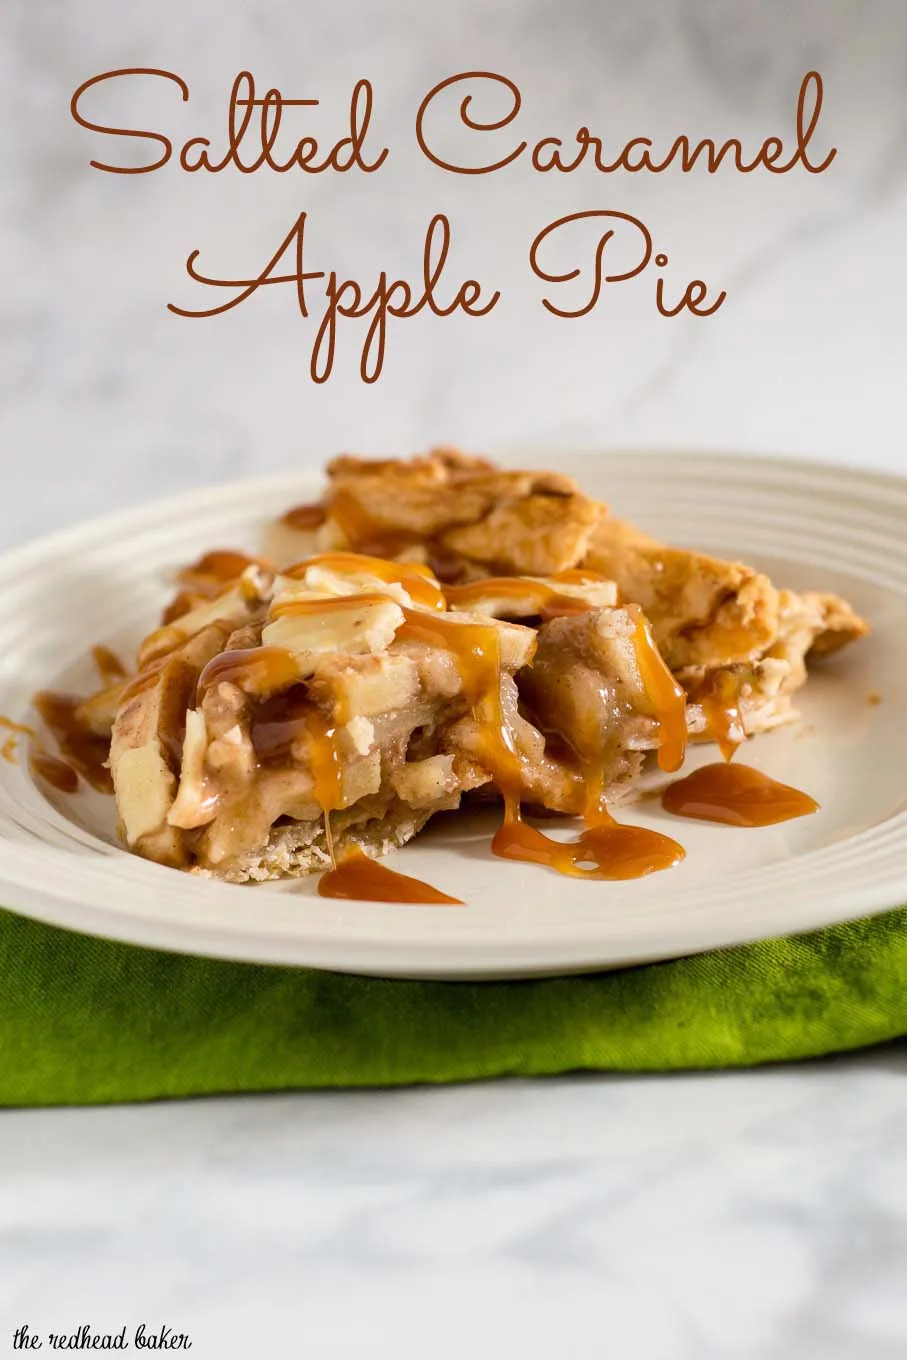 Salted caramel apple pie with a beautiful lattice crust is a delicious dessert any time of year. Make this pie ahead of time and freeze it before baking.